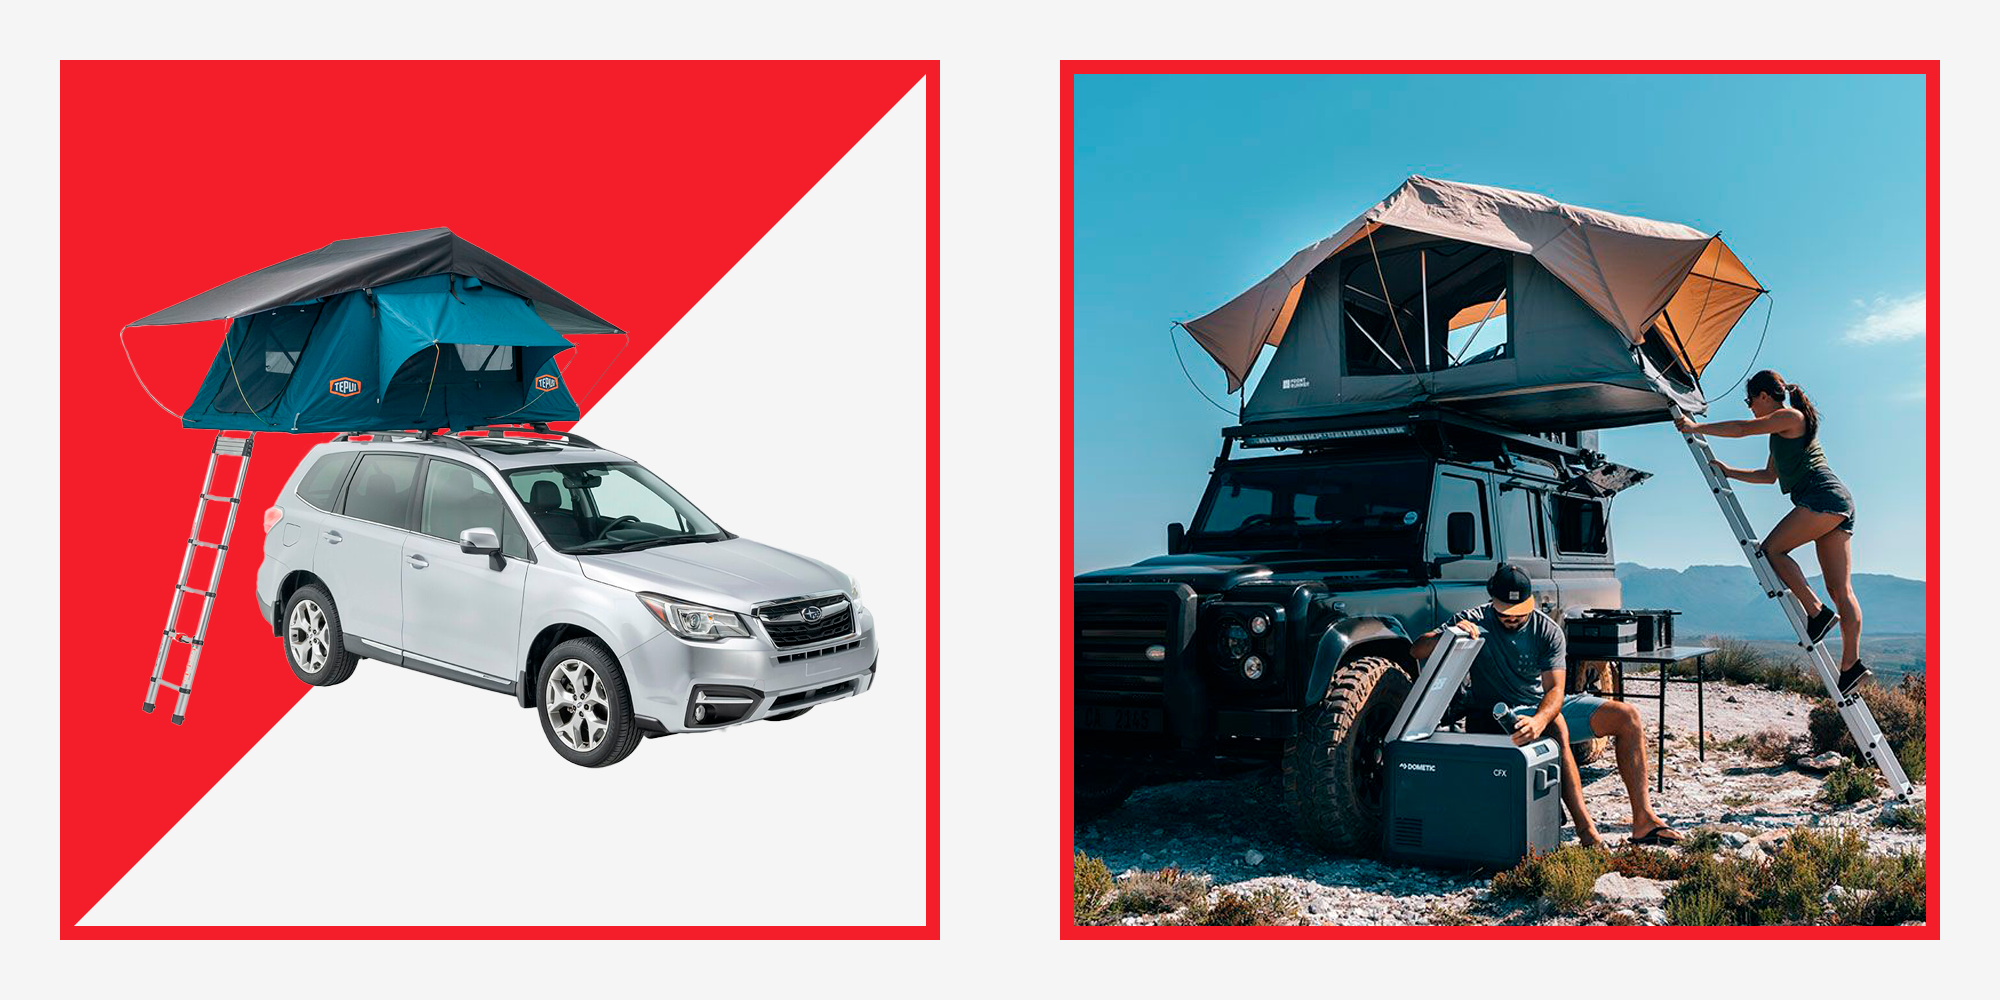 The 7 Best Rooftop Tents 2023 - Best Rooftop Campers